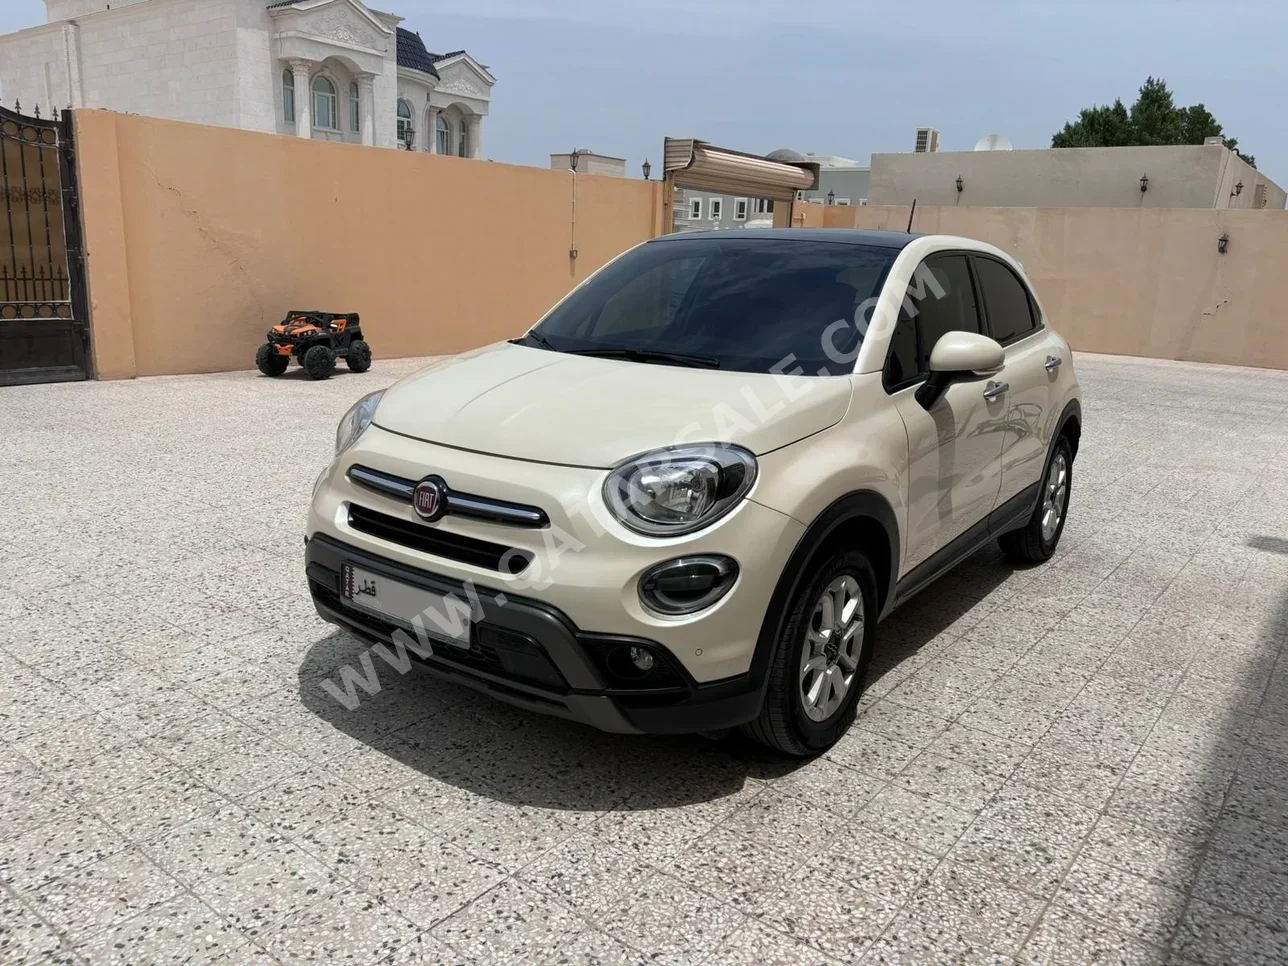  Fiat  500  X  2020  Automatic  53,000 Km  4 Cylinder  Front Wheel Drive (FWD)  Hatchback  Pearl  With Warranty